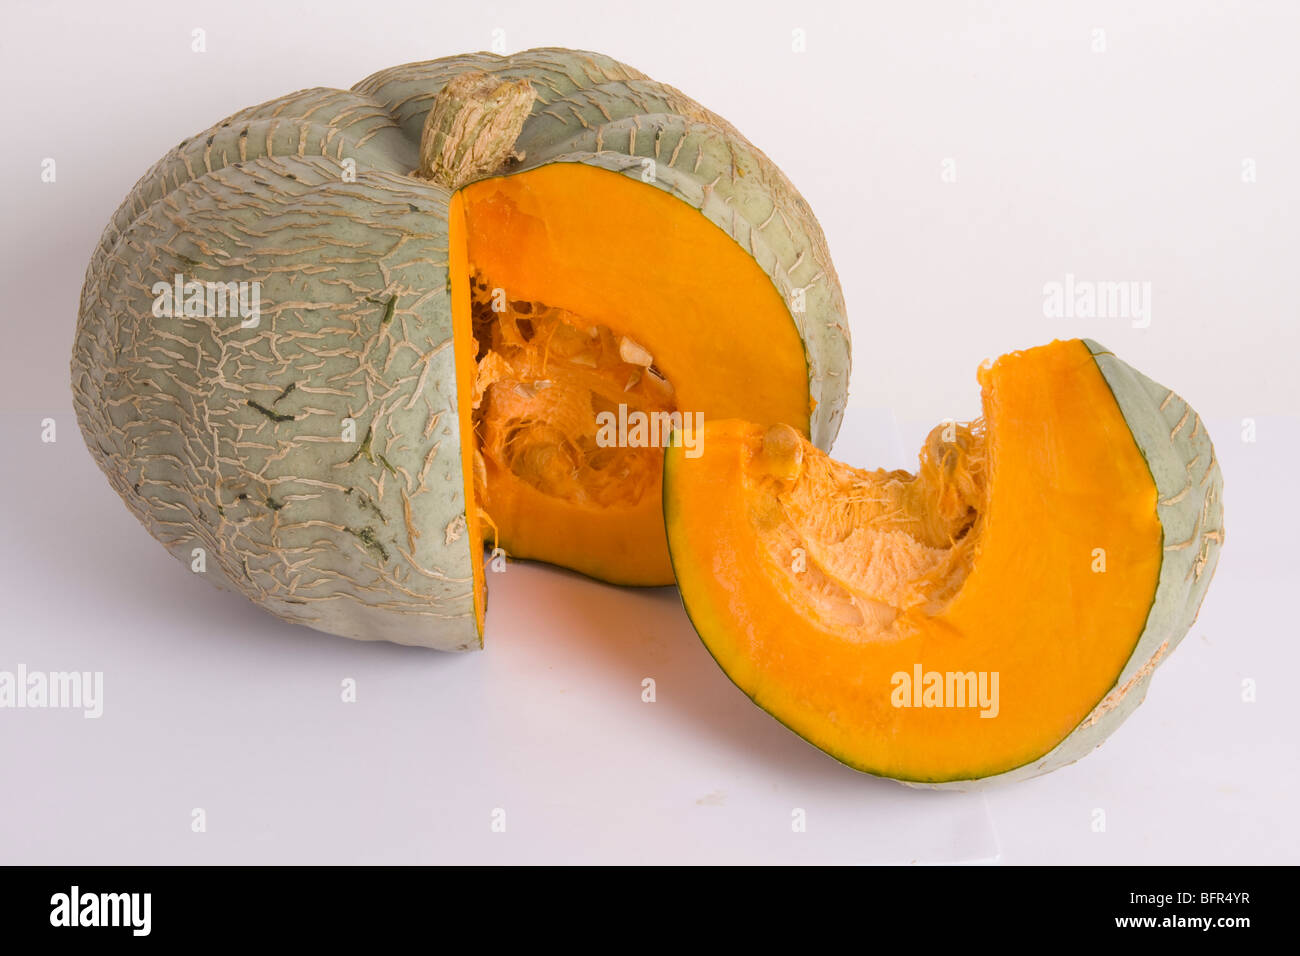 Whole pumpkin with a slice cut out Stock Photo